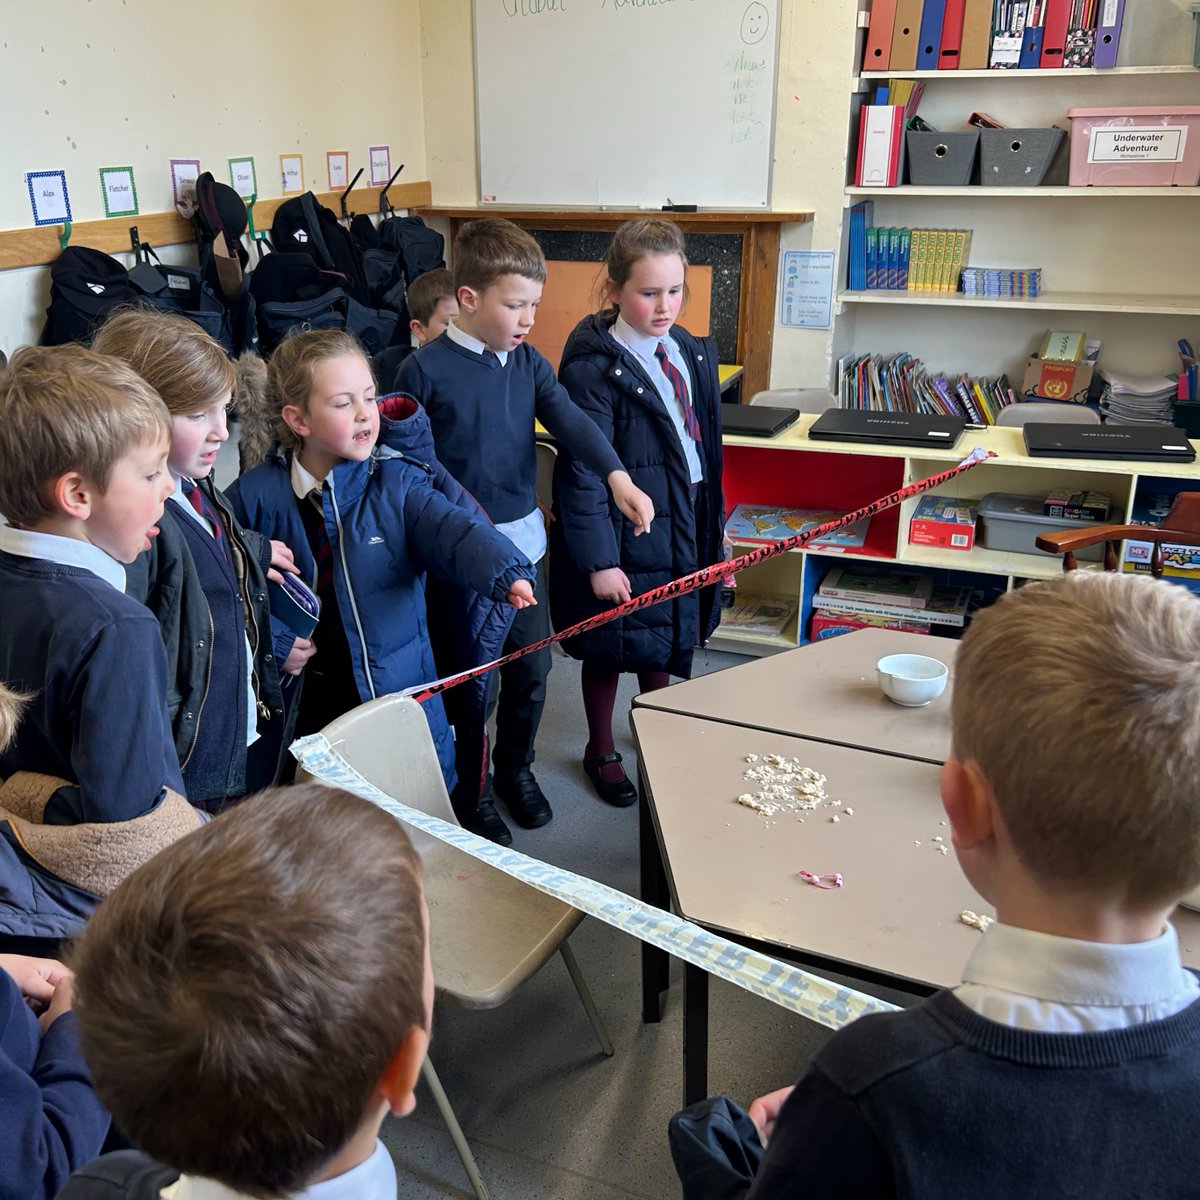 Yr 2 came in to find a ‘crime scene’ this week. They found various clues: porridge handprints, a red ribbon, a lock of golden hair and a necklace. The children analysed the evidence to try to solve the mystery #thisisoswestry #preplife #oswestry #prepschool #solvethemystery